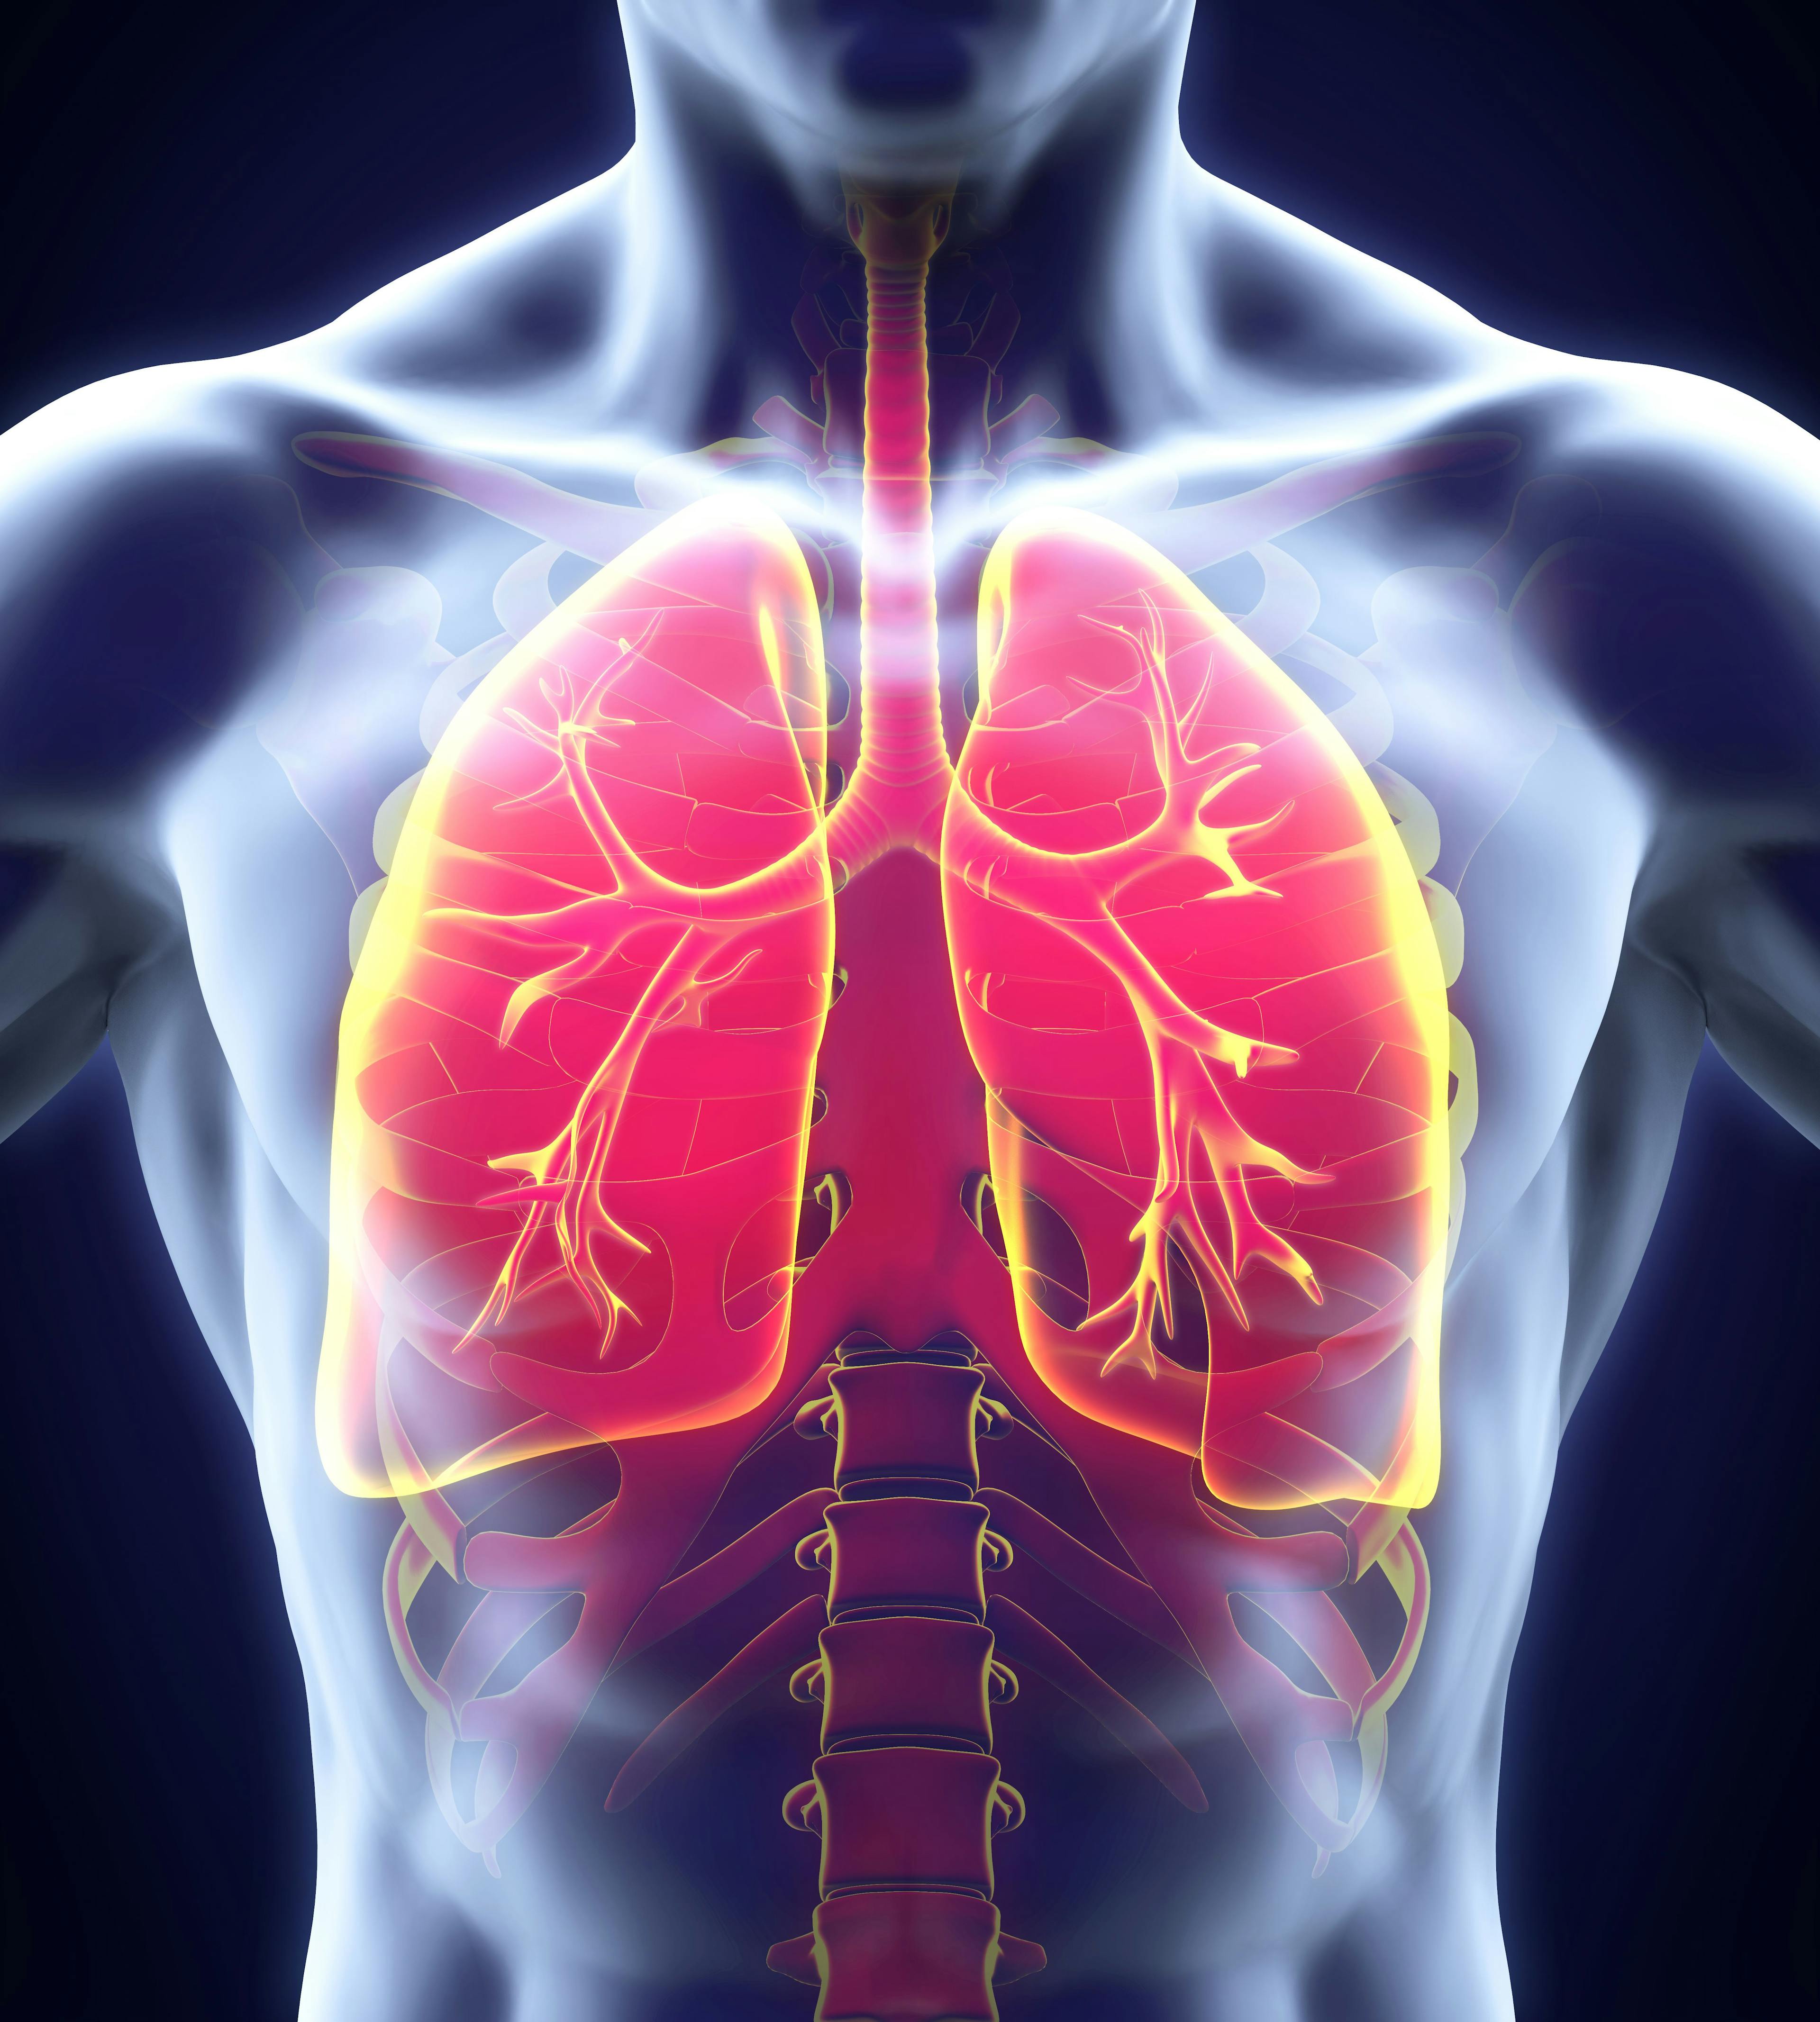 Zinc May Ease Symptoms, Accelerate Recovery in Patients With Respiratory Tract Infections